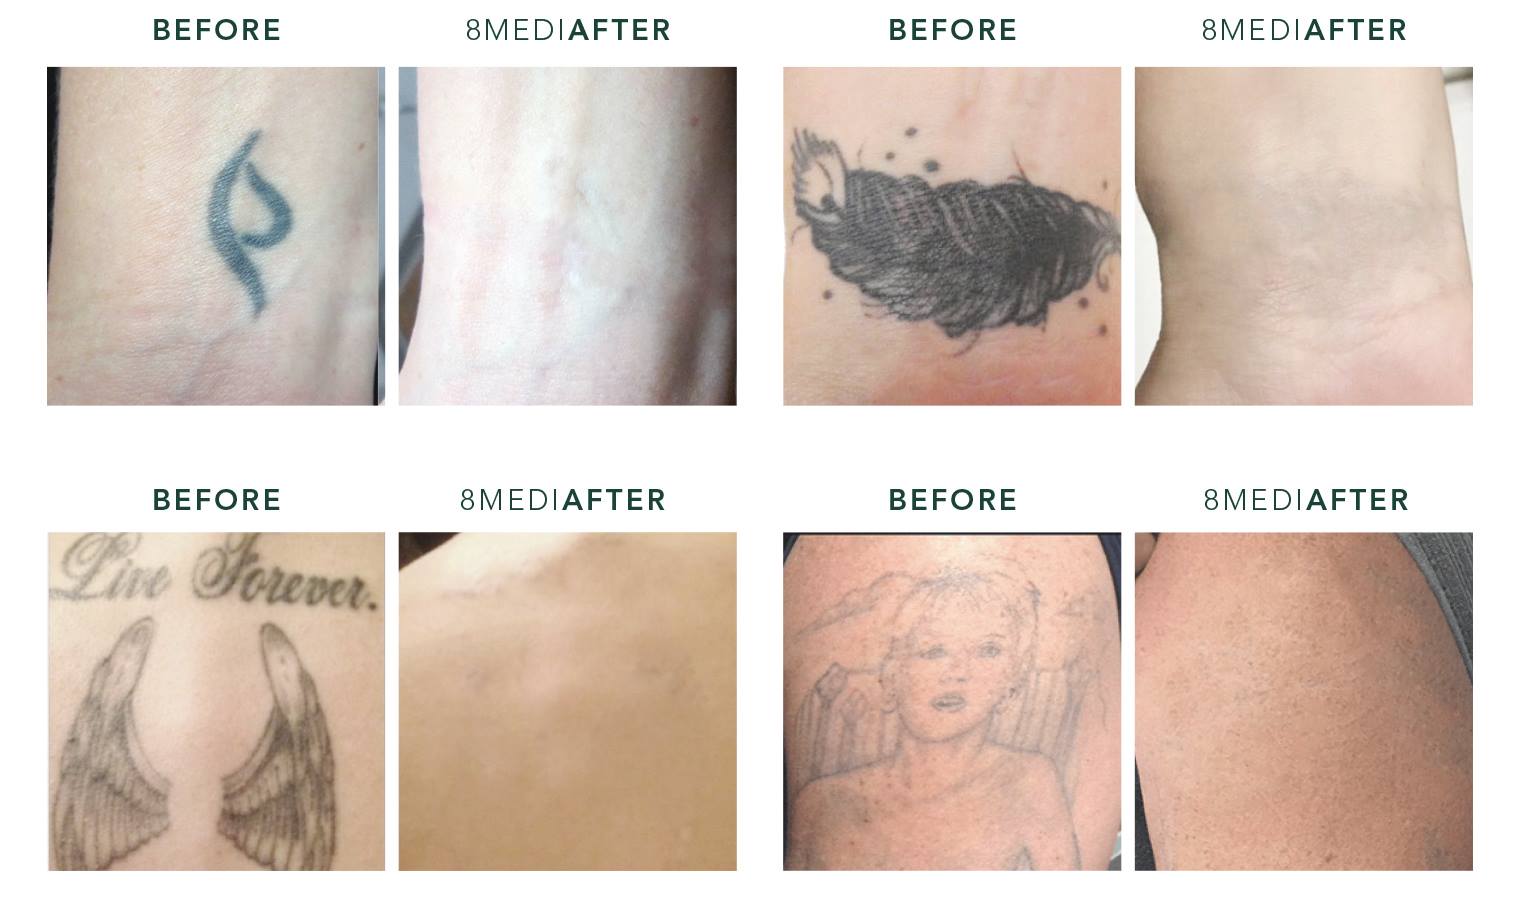 3. Hydrogen Peroxide Tattoo Removal: Does It Really Work? - wide 4